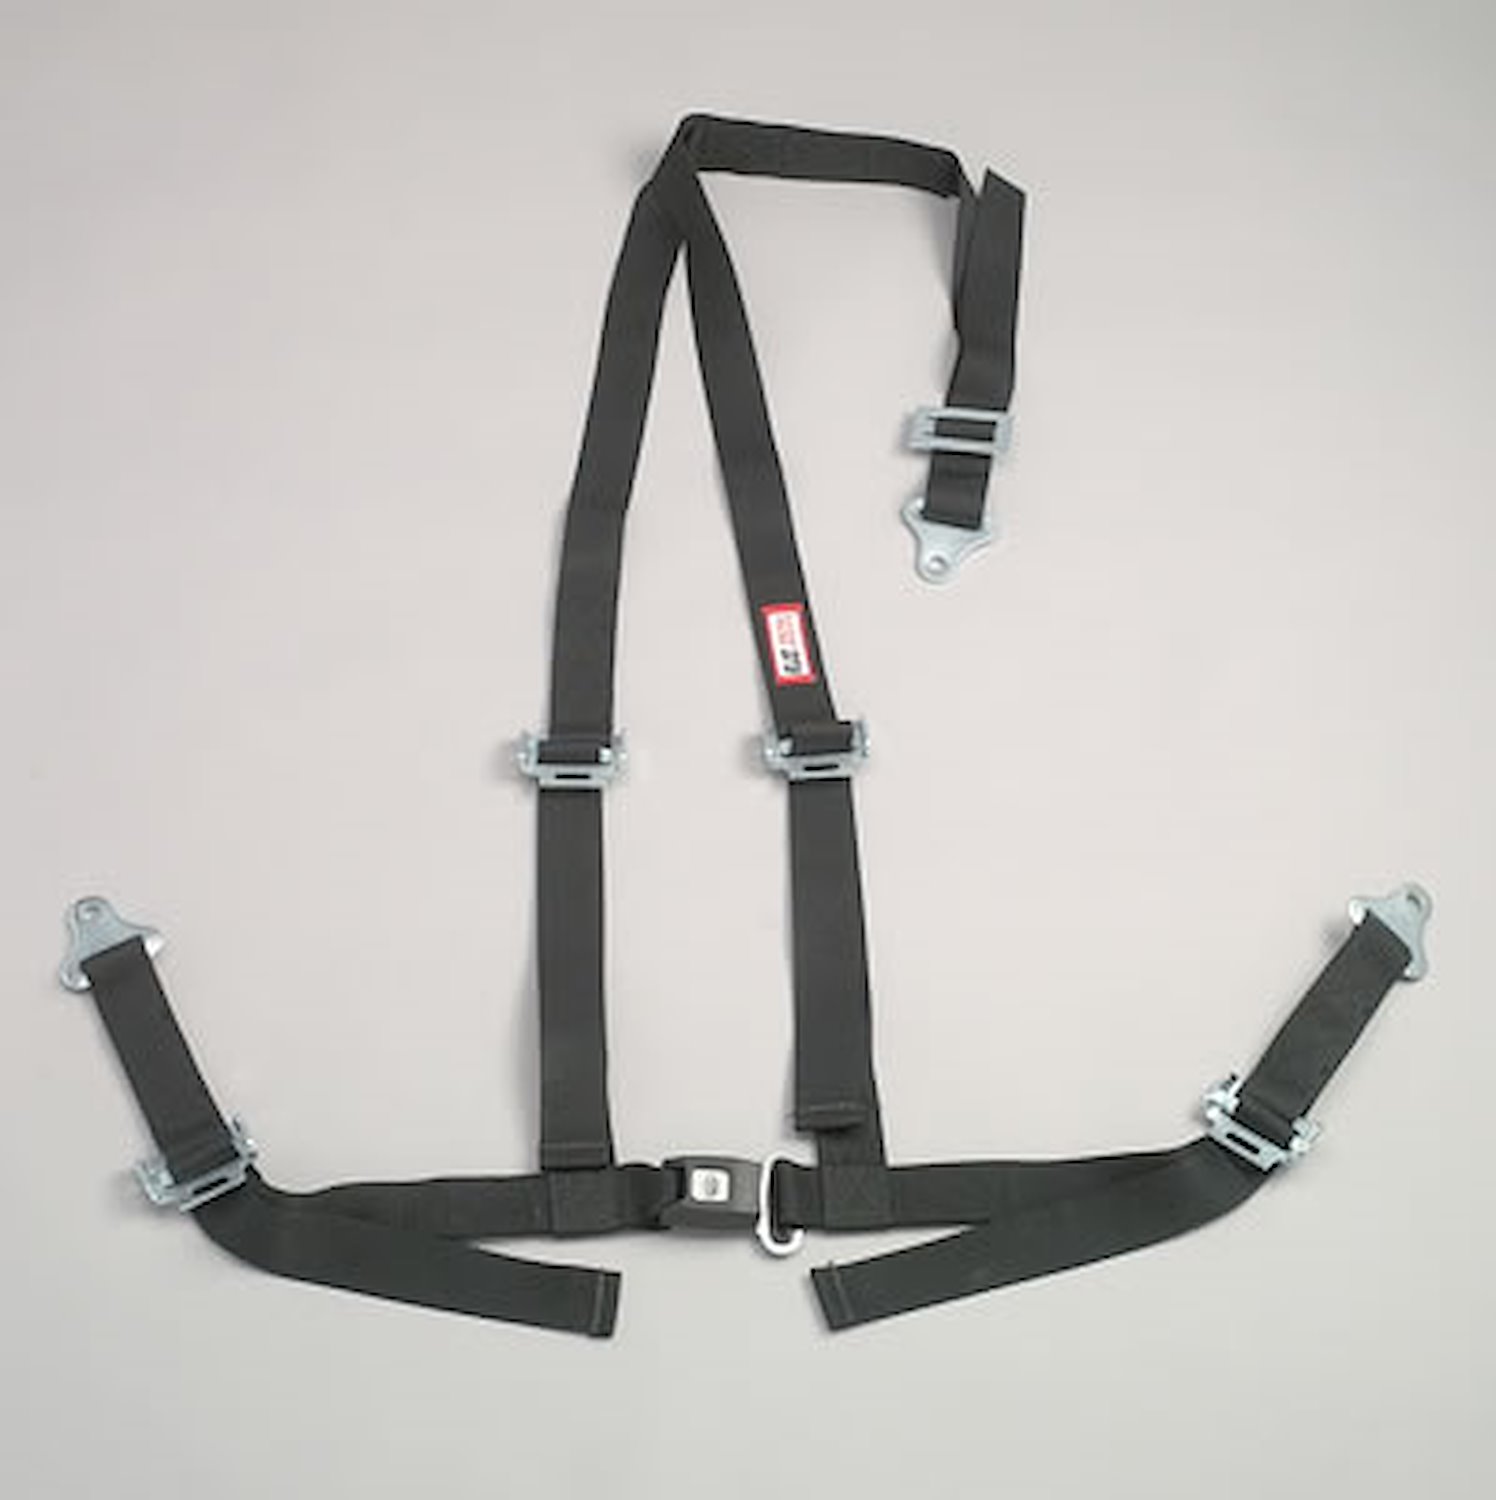 NON-SFI B&T HARNESS 2 PULL DOWN Lap Belt 2 S. H. Individual ROLL BAR Mount ALL WRAP ENDS w/STERNUM STRAP BLACK